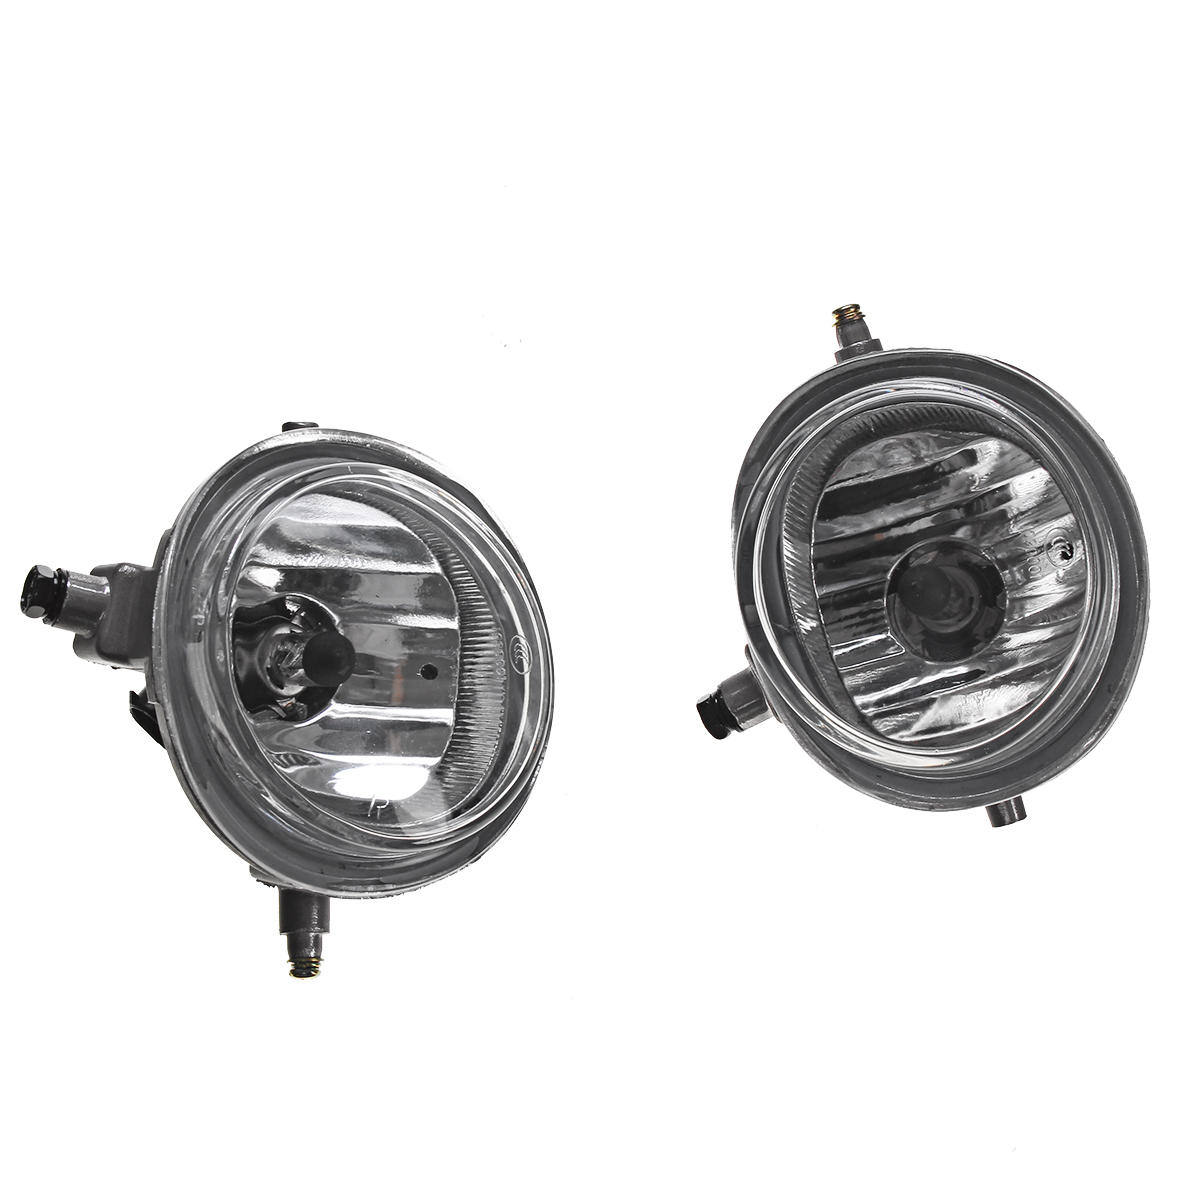 Car Front Fog Lights Lamps Clear Lens with H11 Halogen Bulbs Yellow Pair for Mazda 2 3 6 CX5 CX7